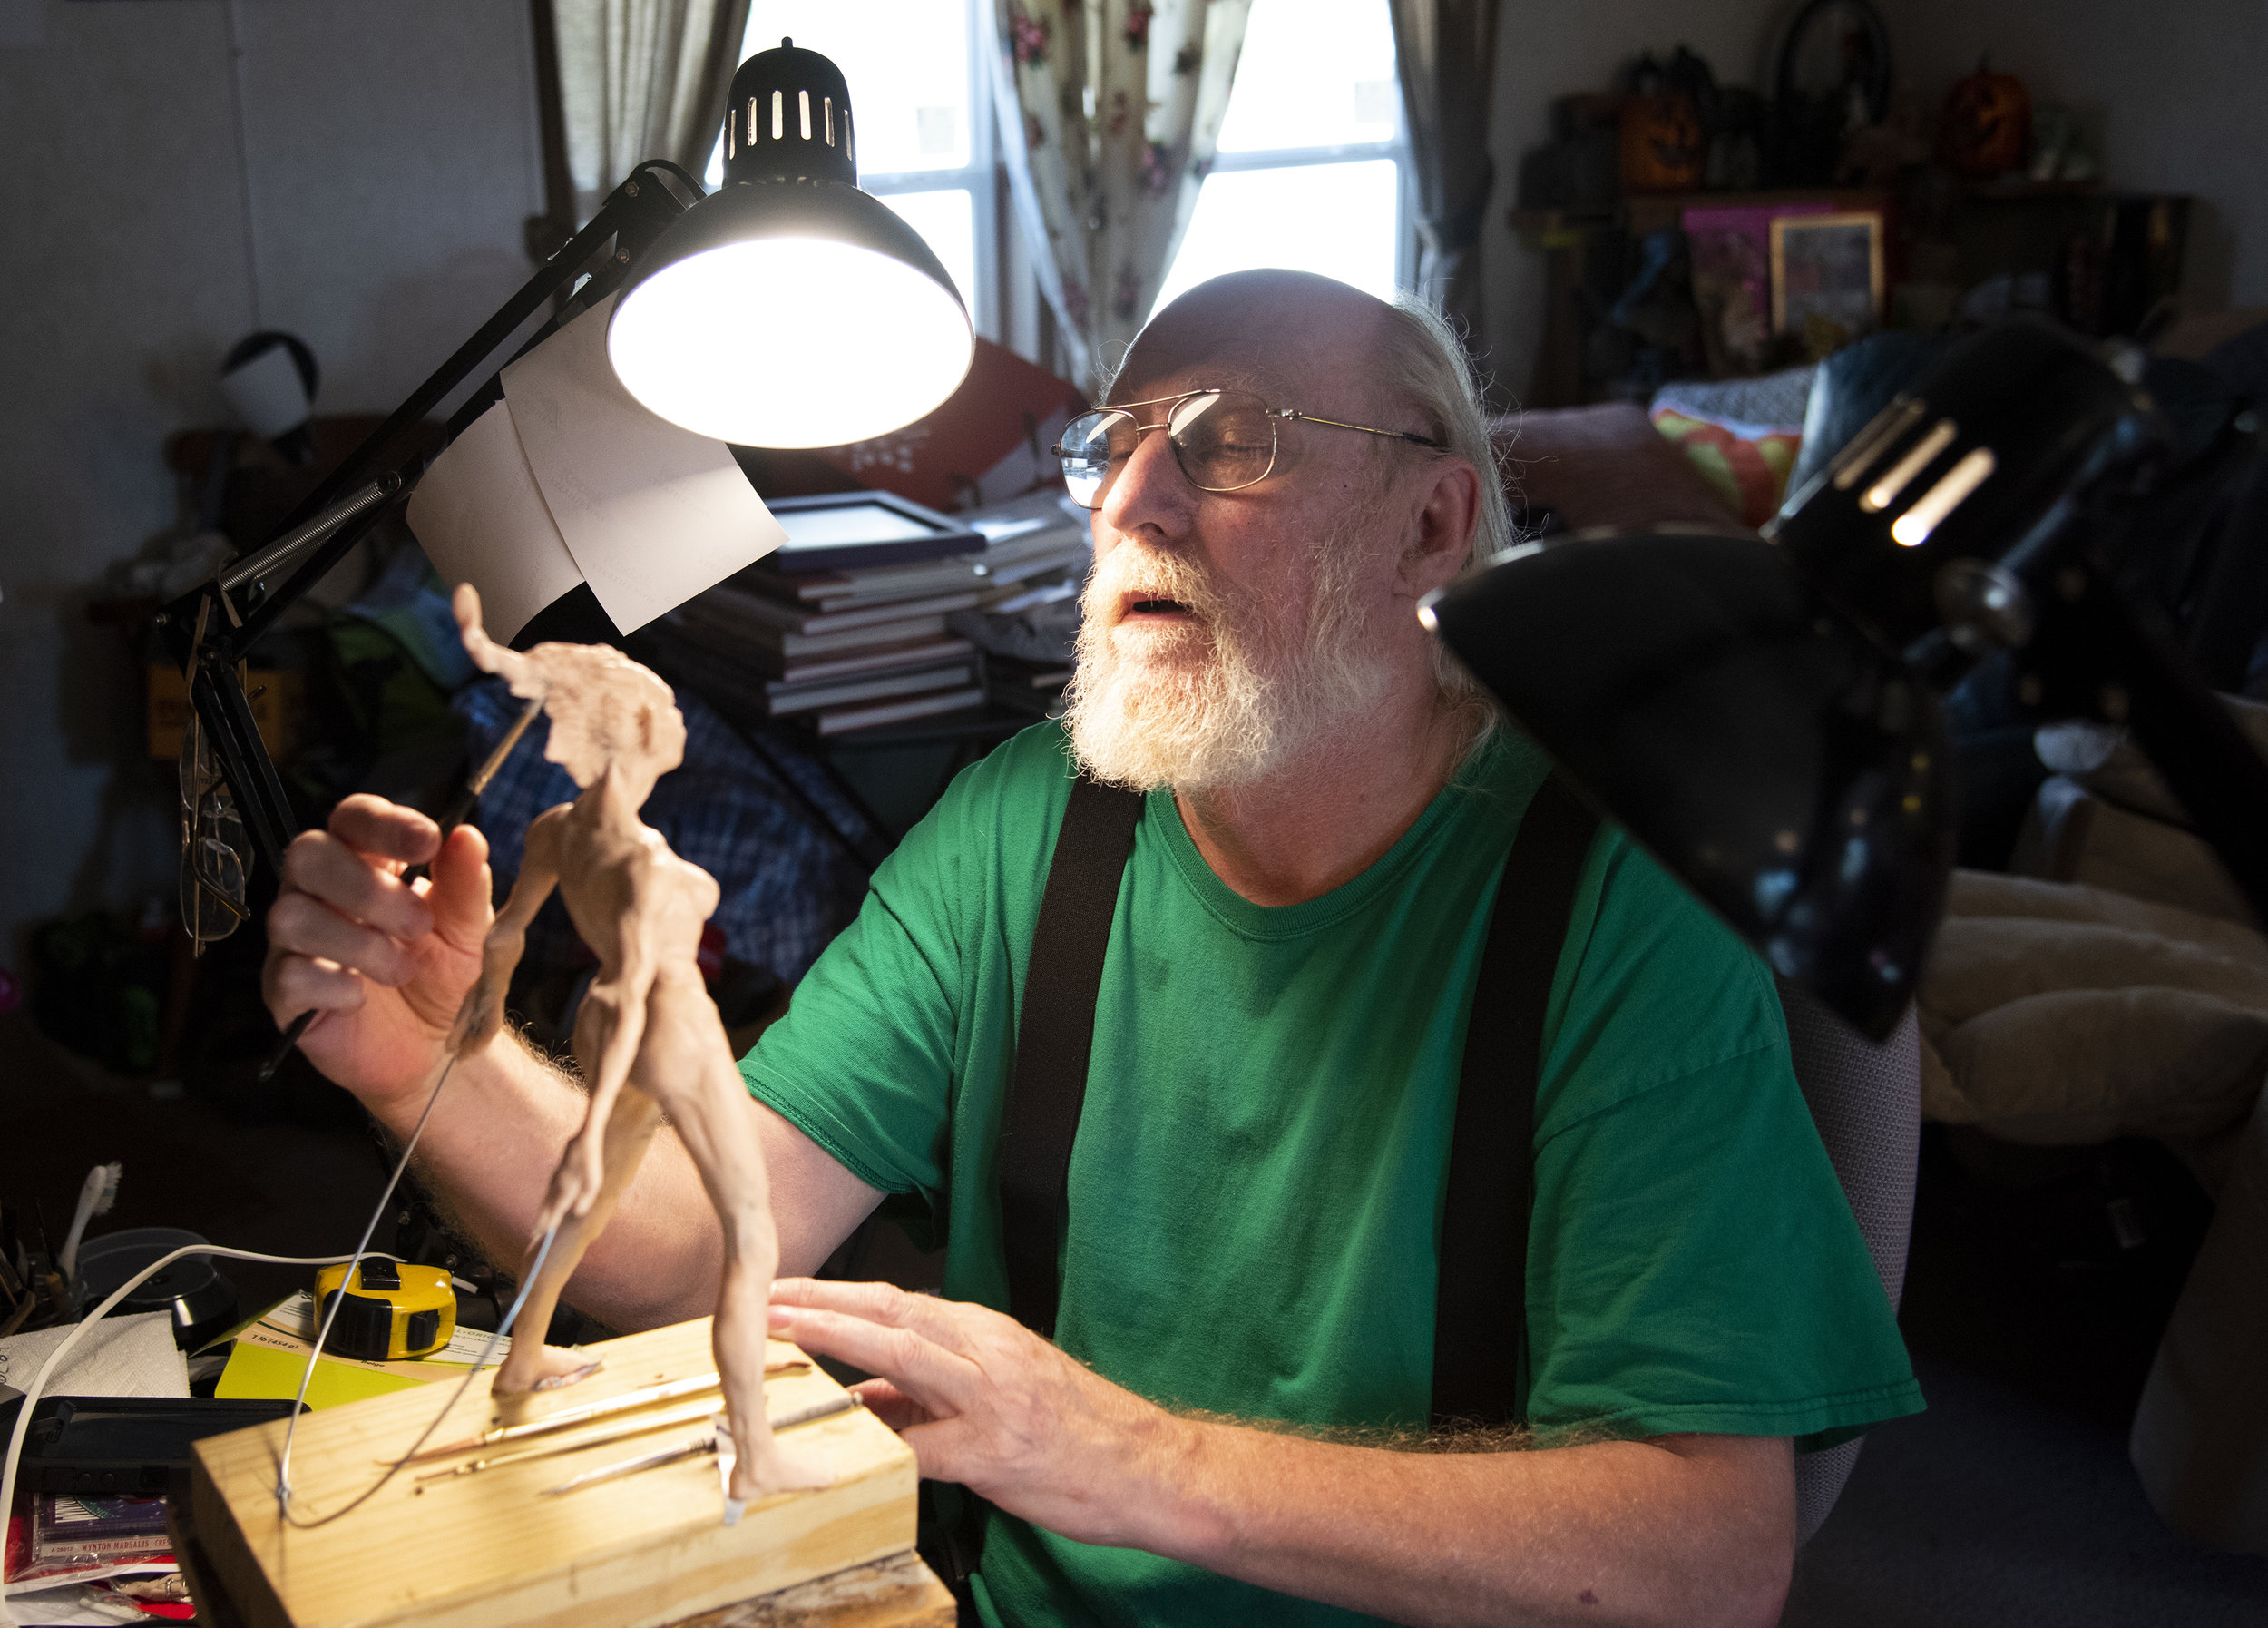  Wayne Hansen, a first generation American, works on a sculpture in his Julian Woods home. In the mid to late 1970s, Hansen helped with the construction of Julian Woods by building several homes in the community. Ironically, he says, he now lives in 